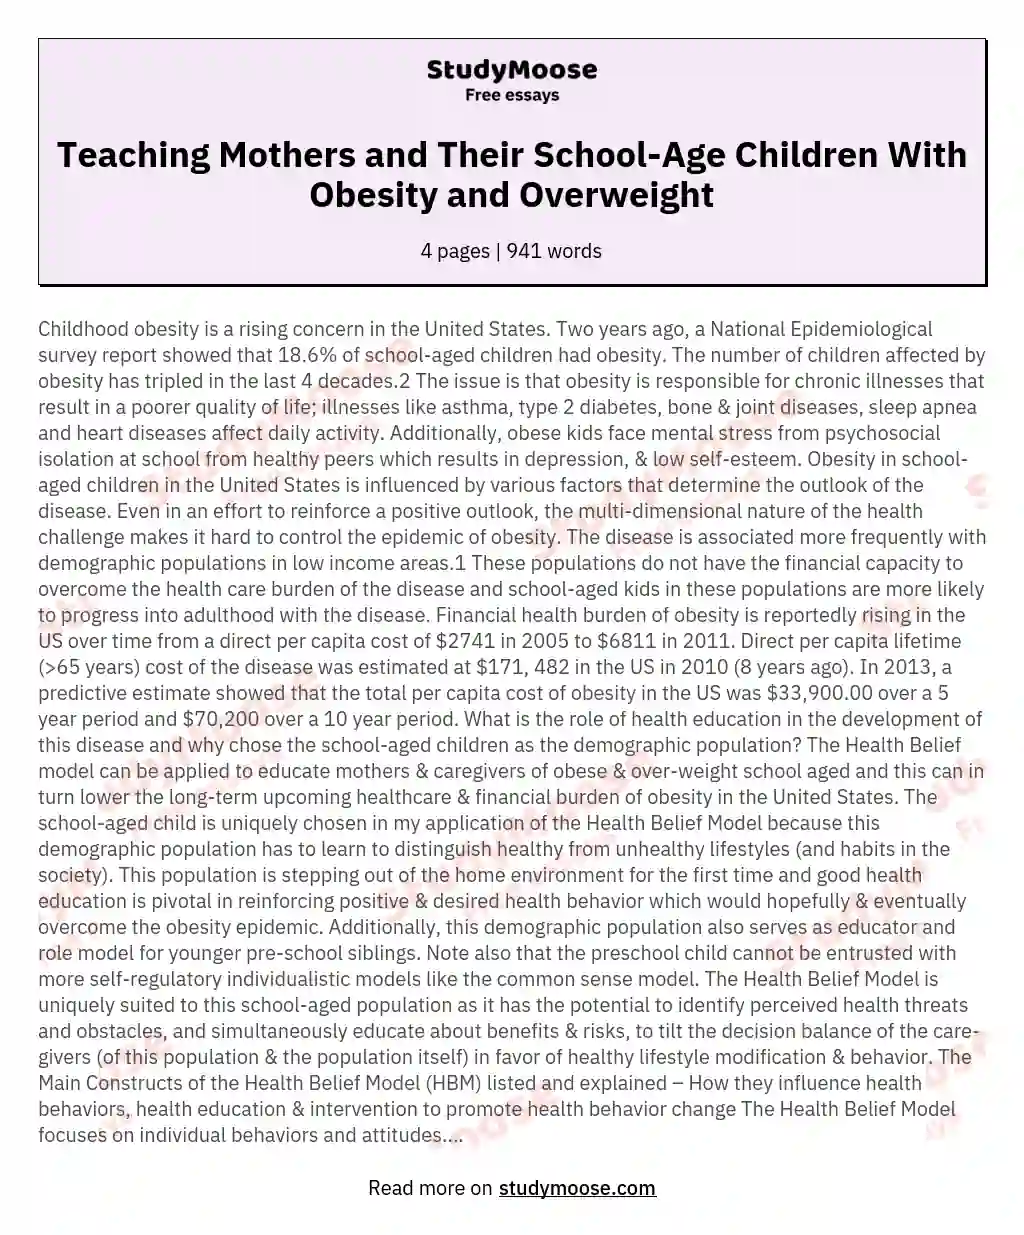 Teaching Mothers and Their School-Age Children With Obesity and Overweight essay